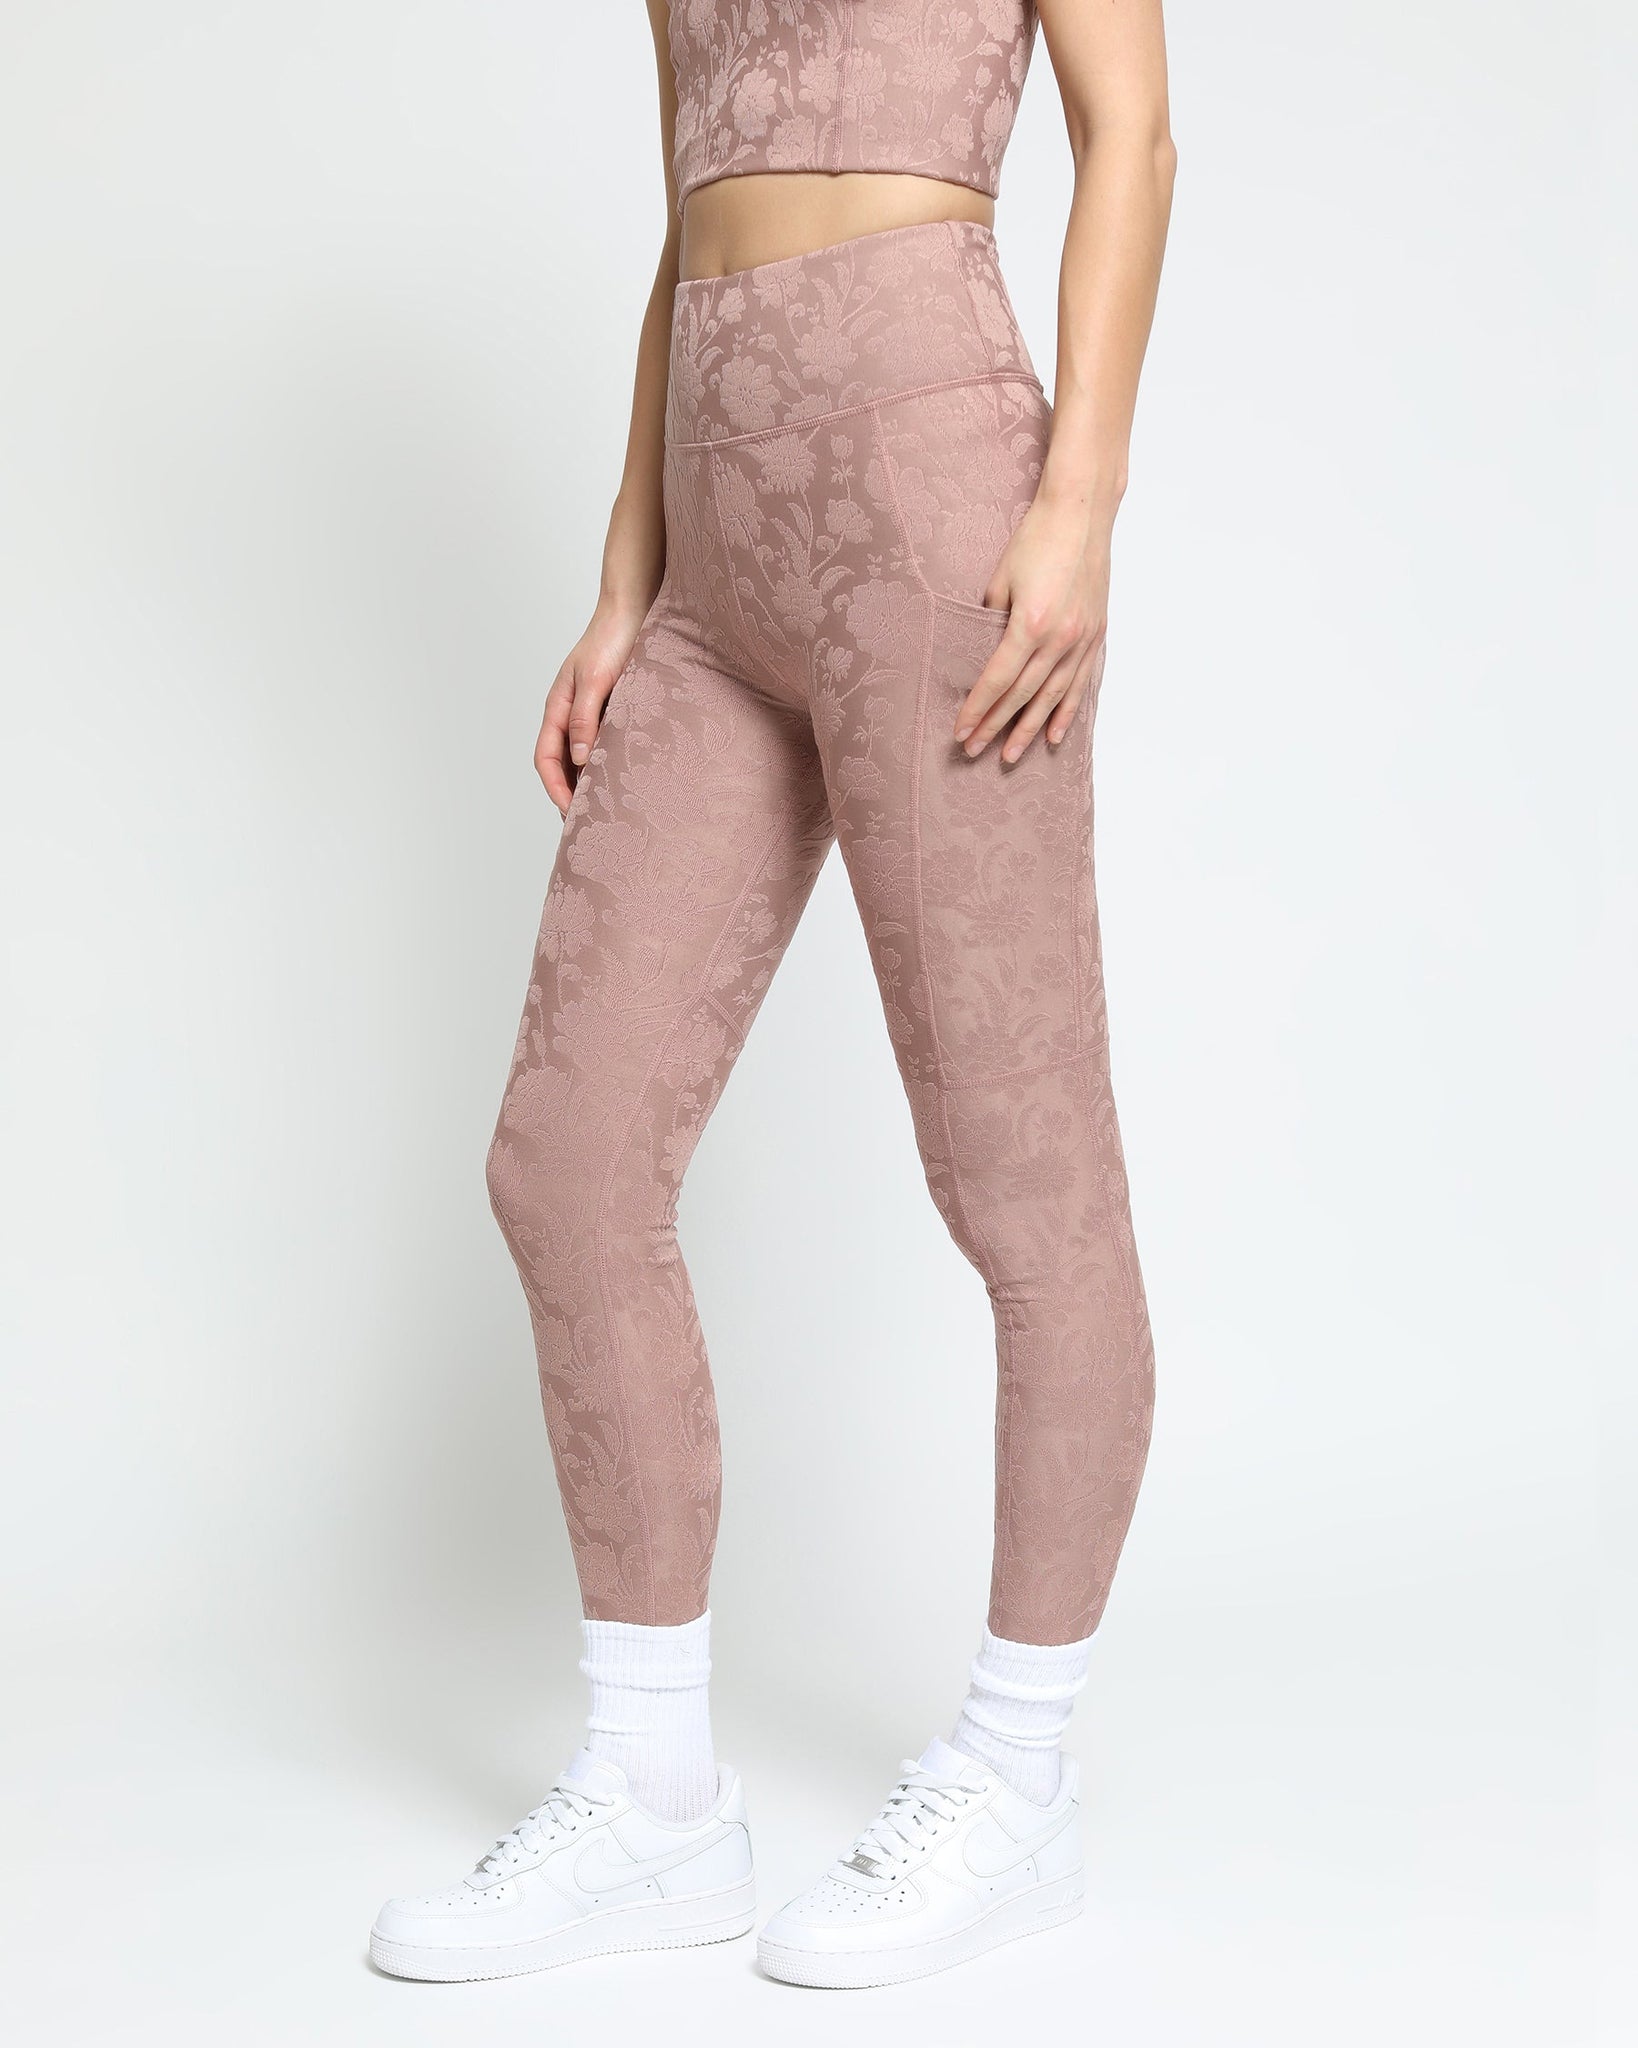 Oroblù - All Colors Lace – tights dept.